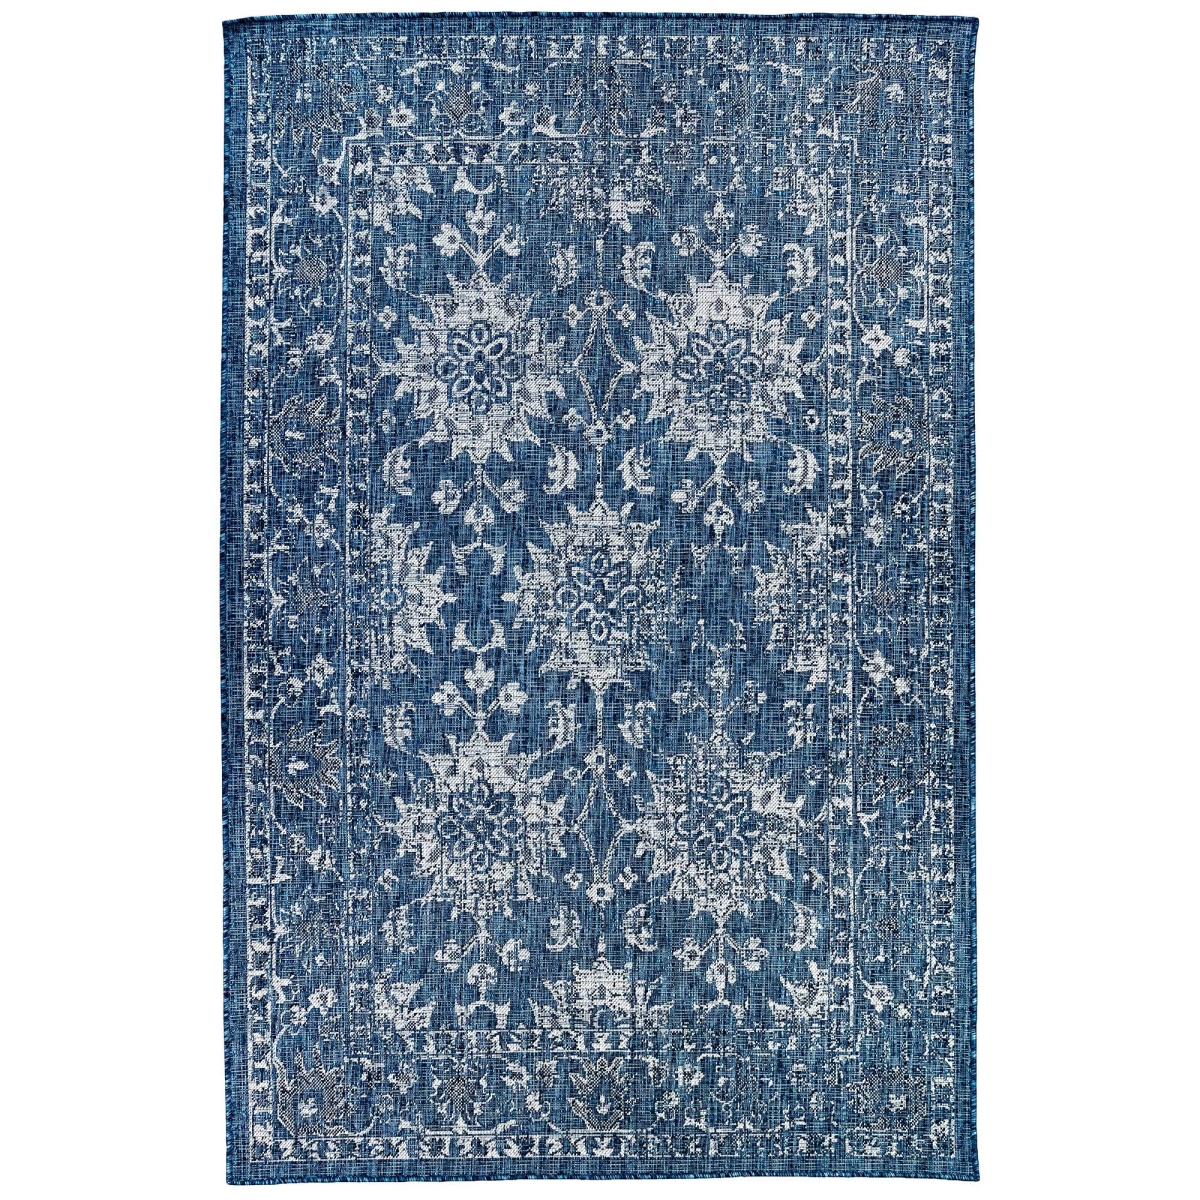 Trans-ocean Imports Cre45841833 39 In. X 59 In. Liora Manne Carmel Vintage Floral Indoor & Outdoor Wilton Woven Rectangle Rug - Navy